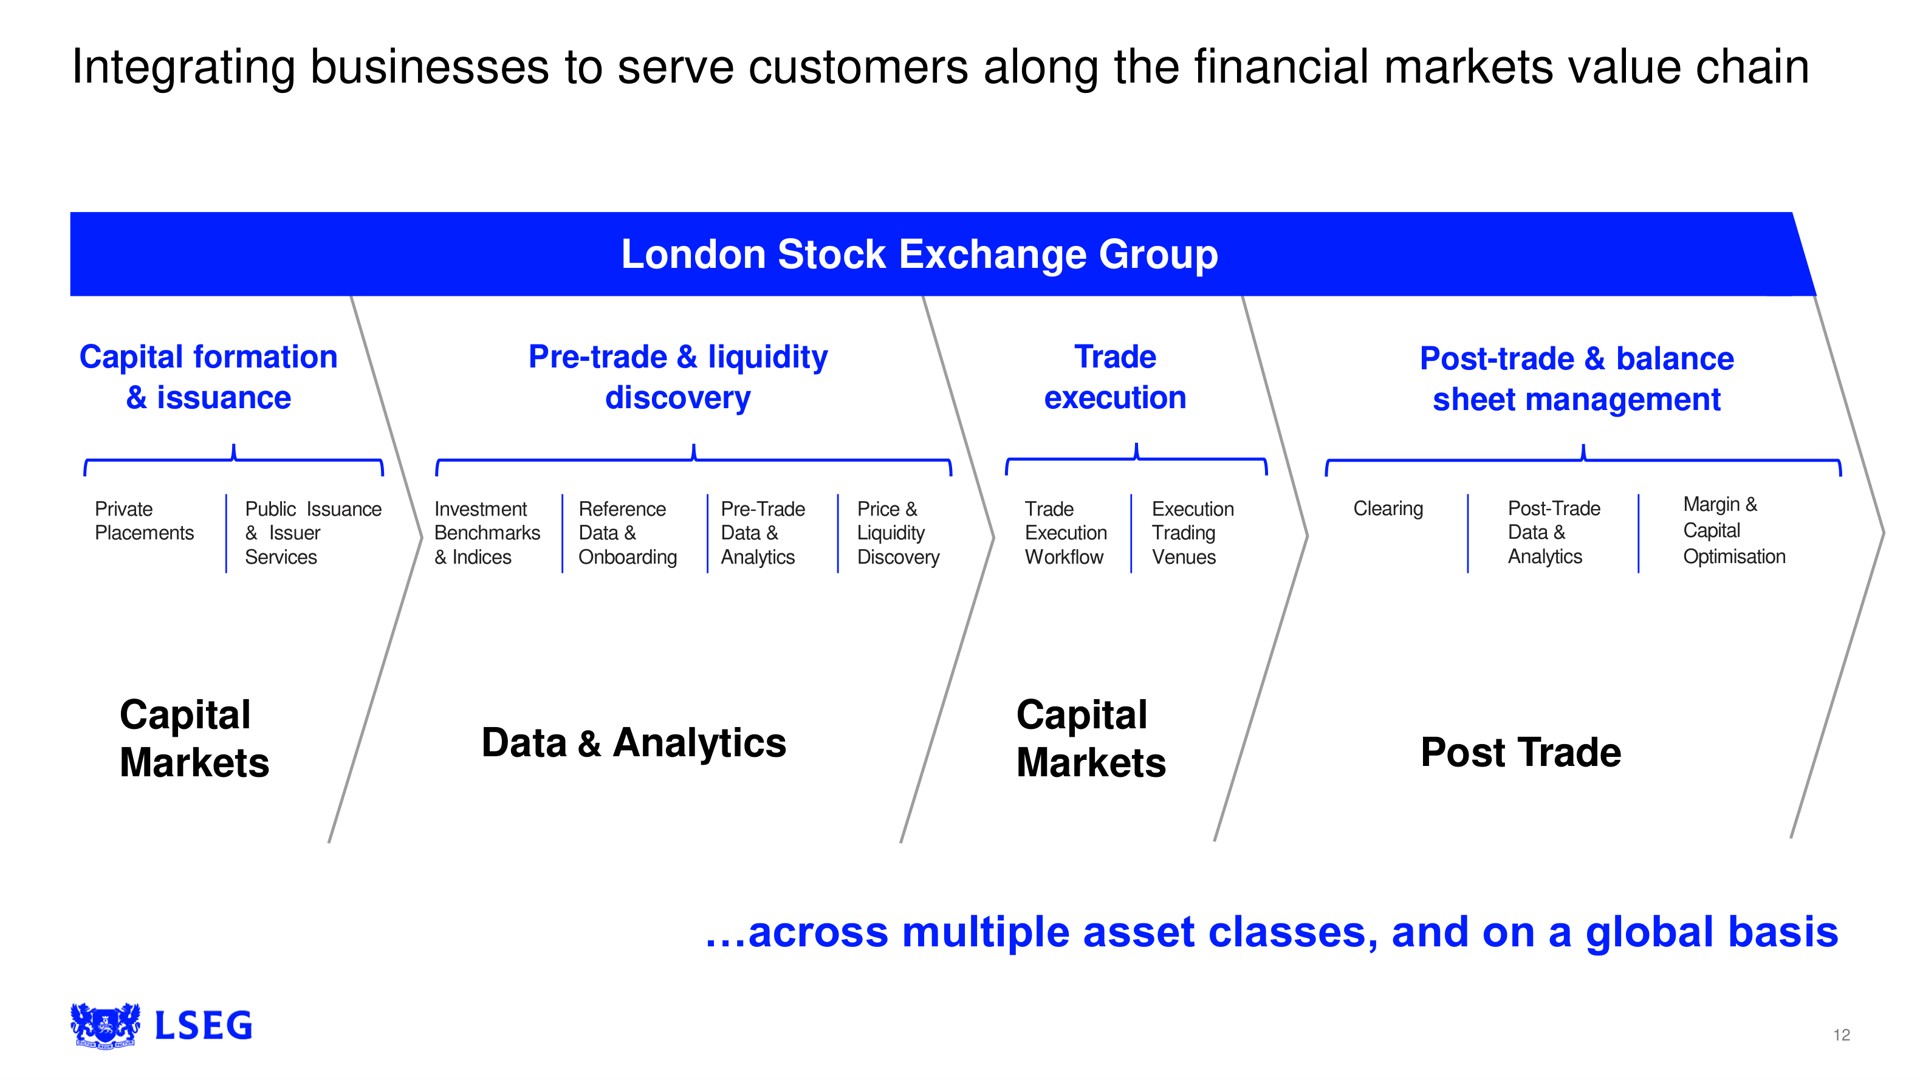 integrating businesses to serve customers along the financial markets value chain stock exchange group capital markets data analytics capital markets post trade across multiple asset classes and on a global basis | LSE